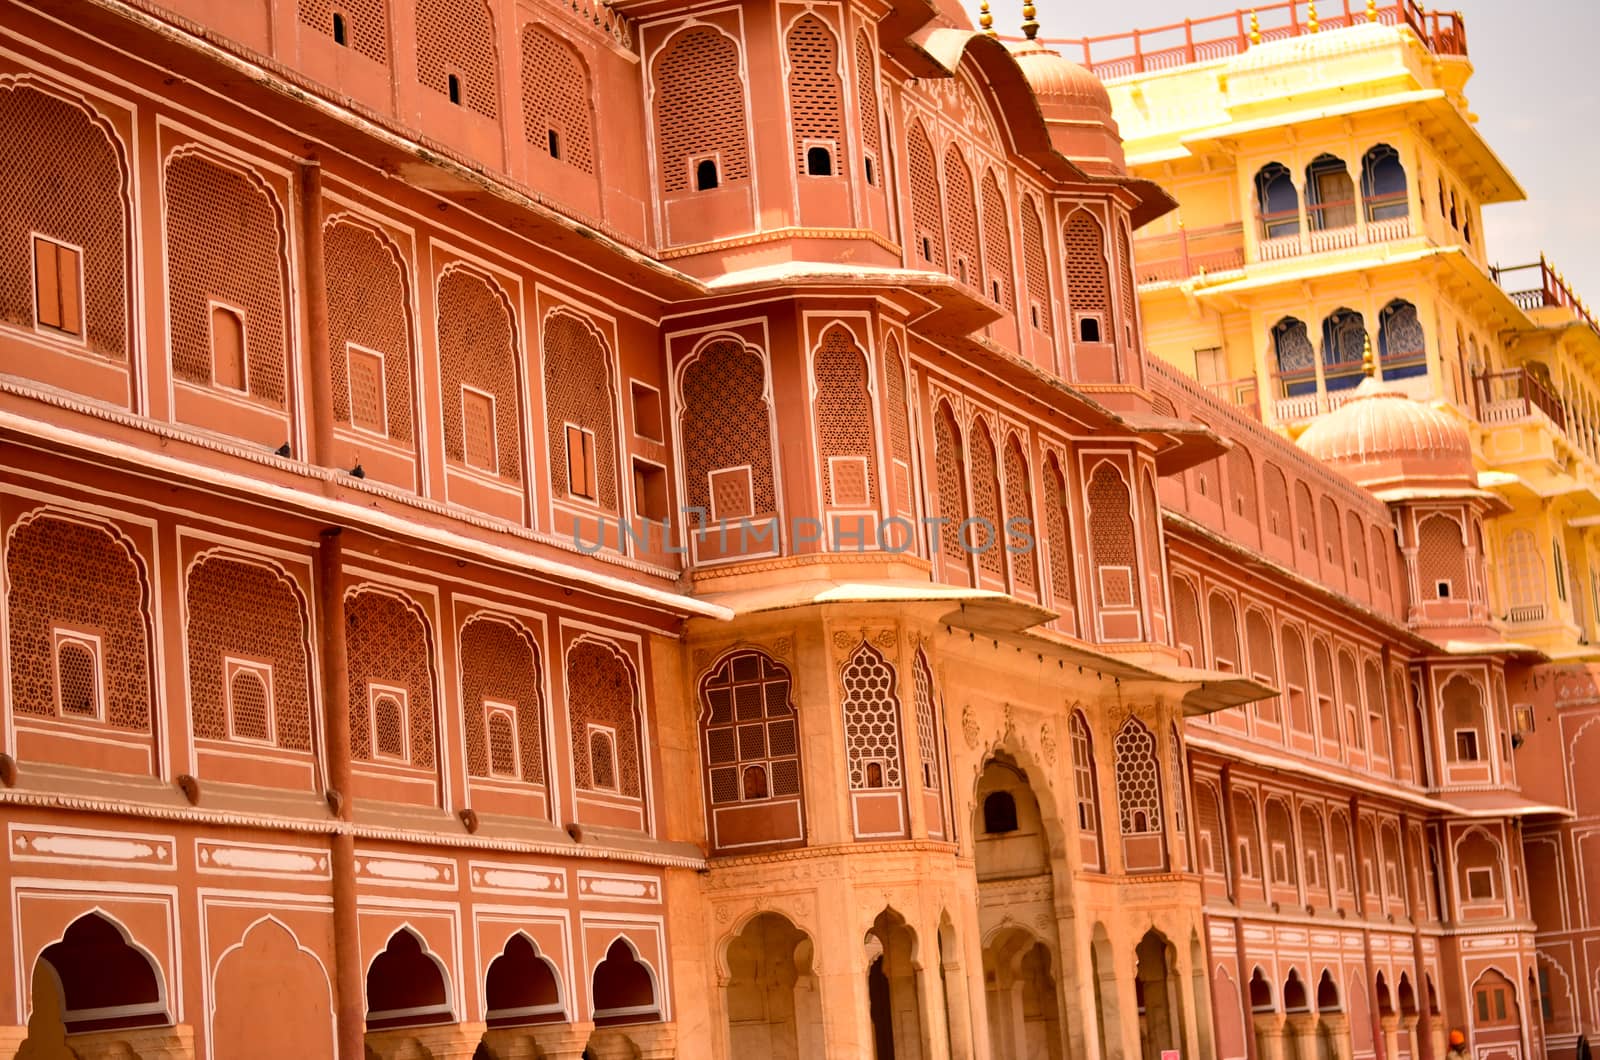 Wall section of City Palace, which includes the Chandra Mahal and Mubarak Mahal palaces and other buildings, is a palace complex in Jaipur, the capital of the Rajasthan, India.